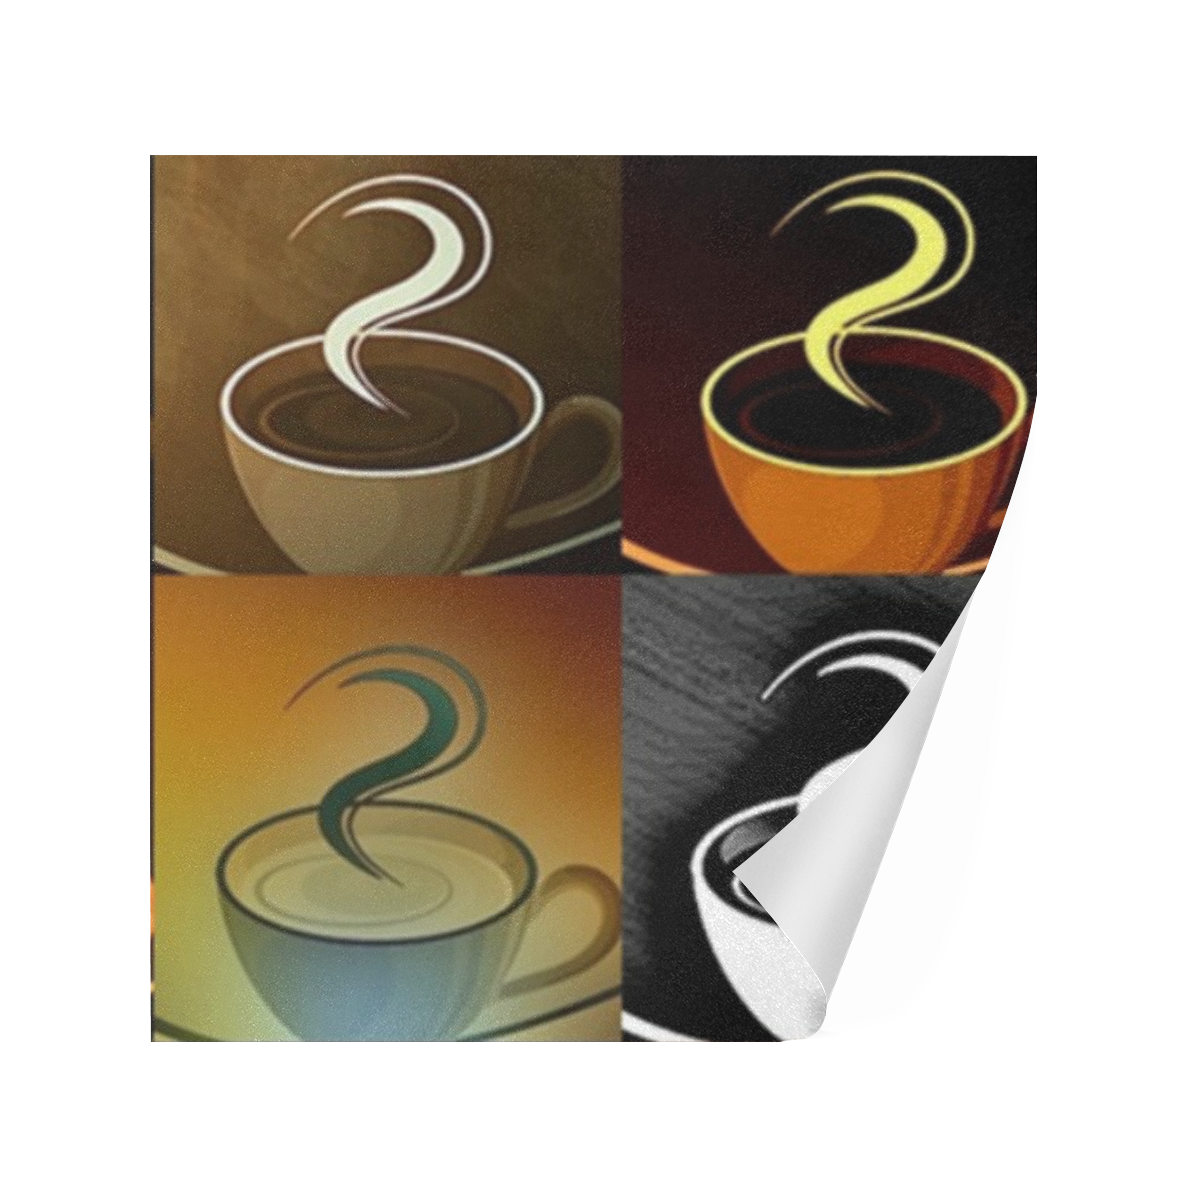 coffee cup montage Gift Wrapping Paper 58"x 23" (1 Roll)